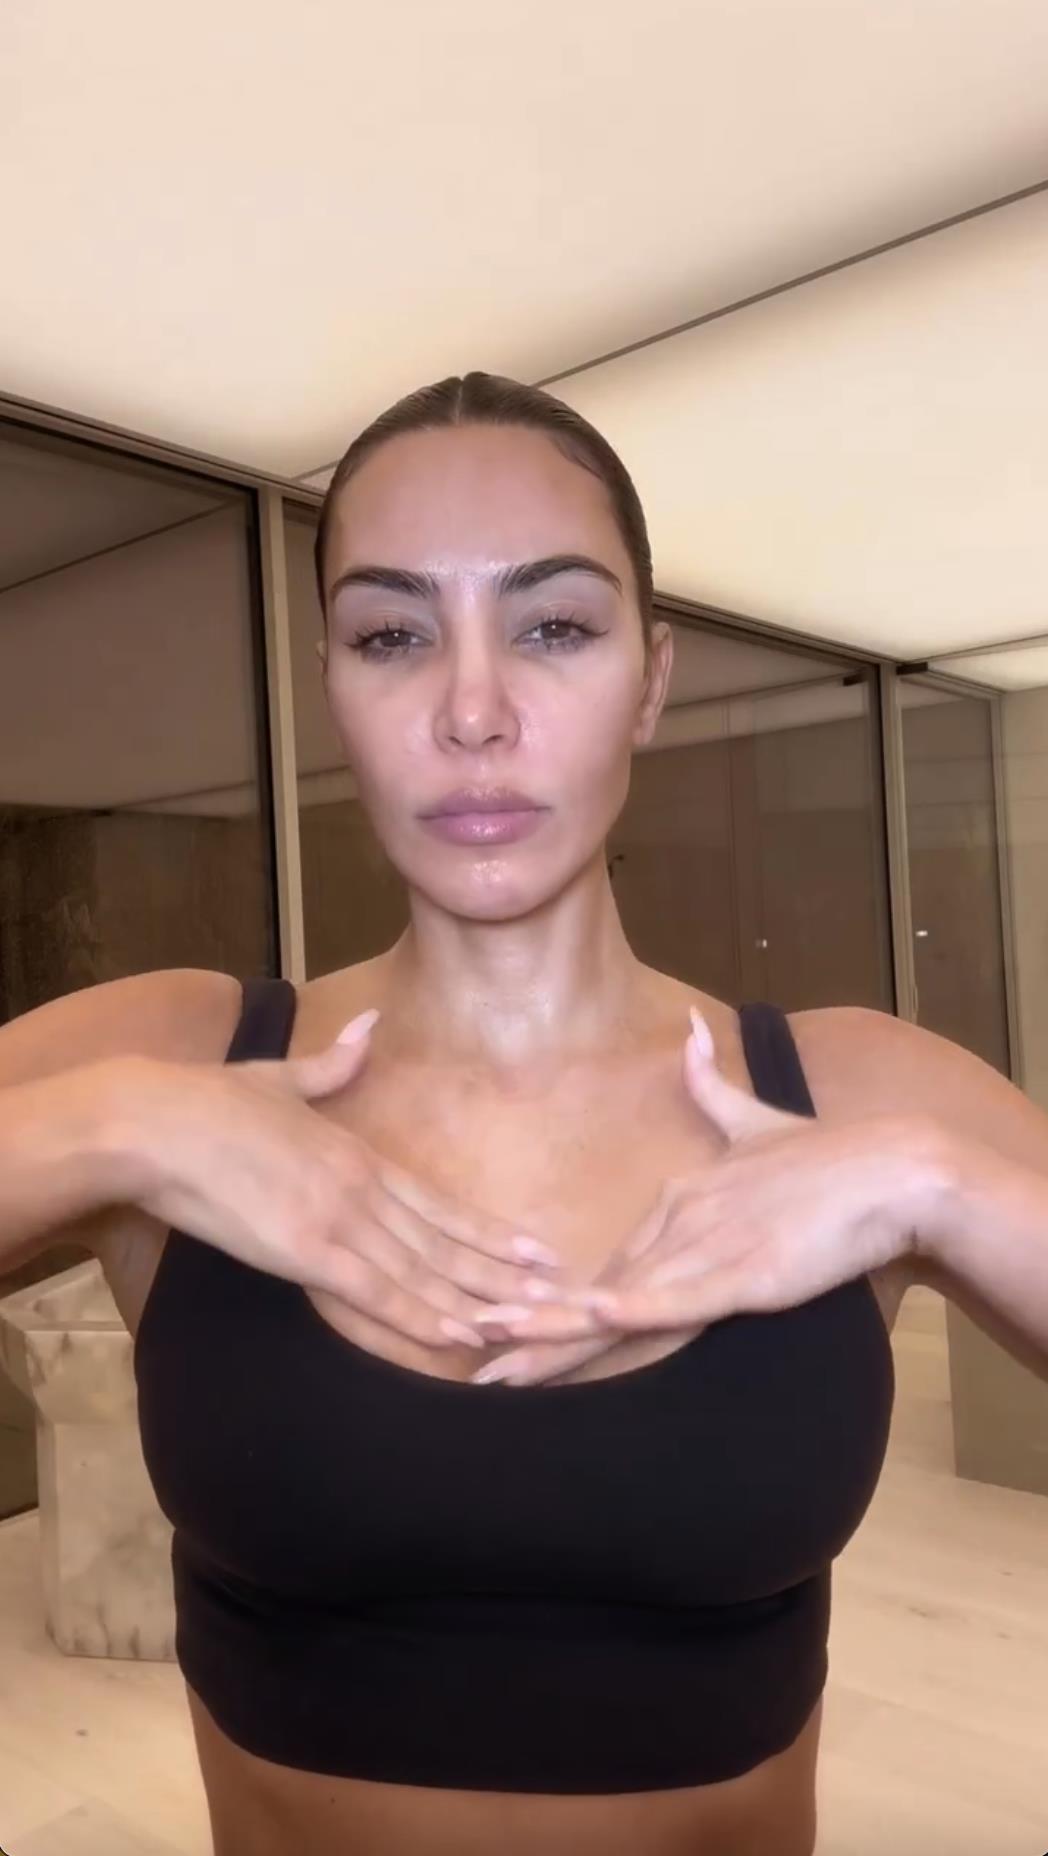 Kim Kardashian flaunts her tiny waist as she ditches her top in new video taken inside huge bathroom of her $60M mansion